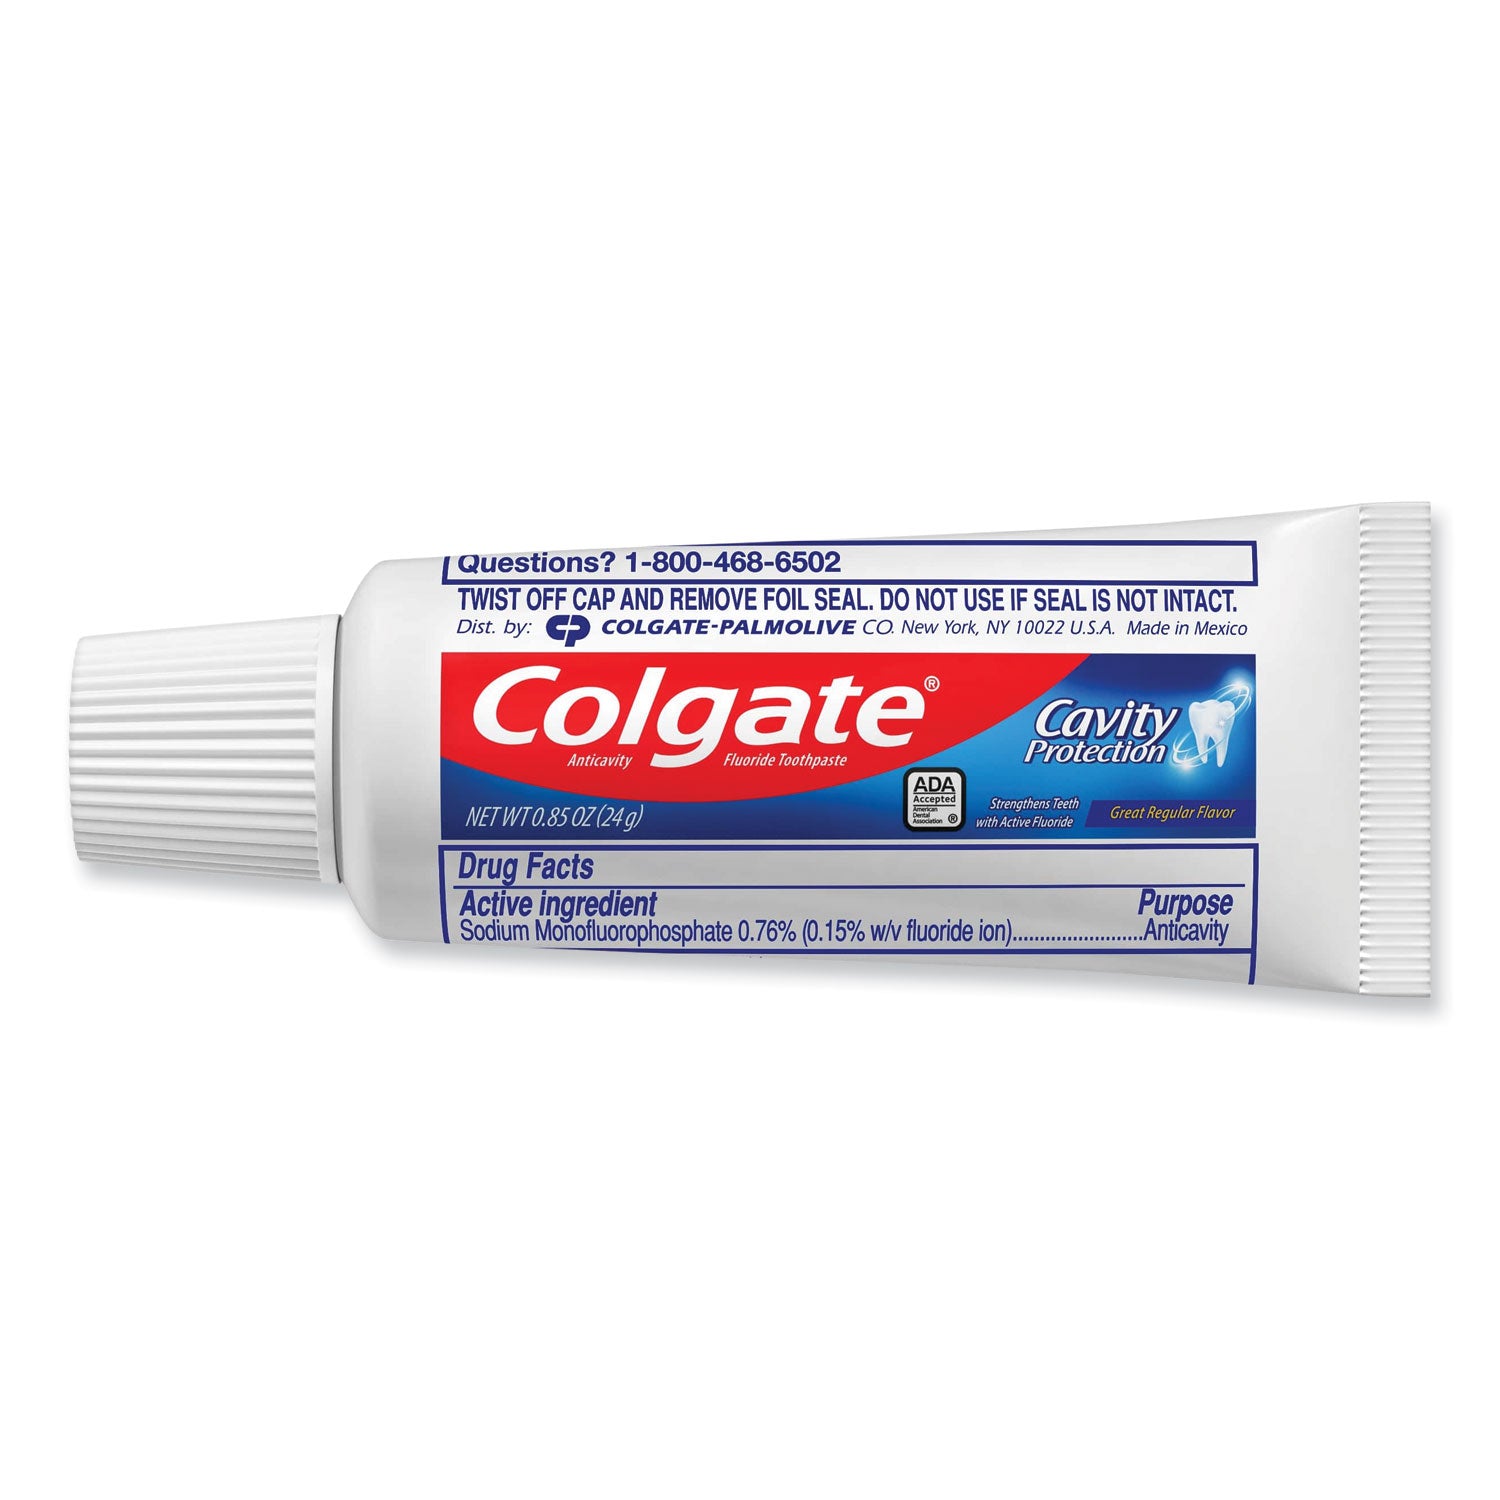 toothpaste-personal-size-085-oz-tube-unboxed-240-carton_cpc09782 - 1